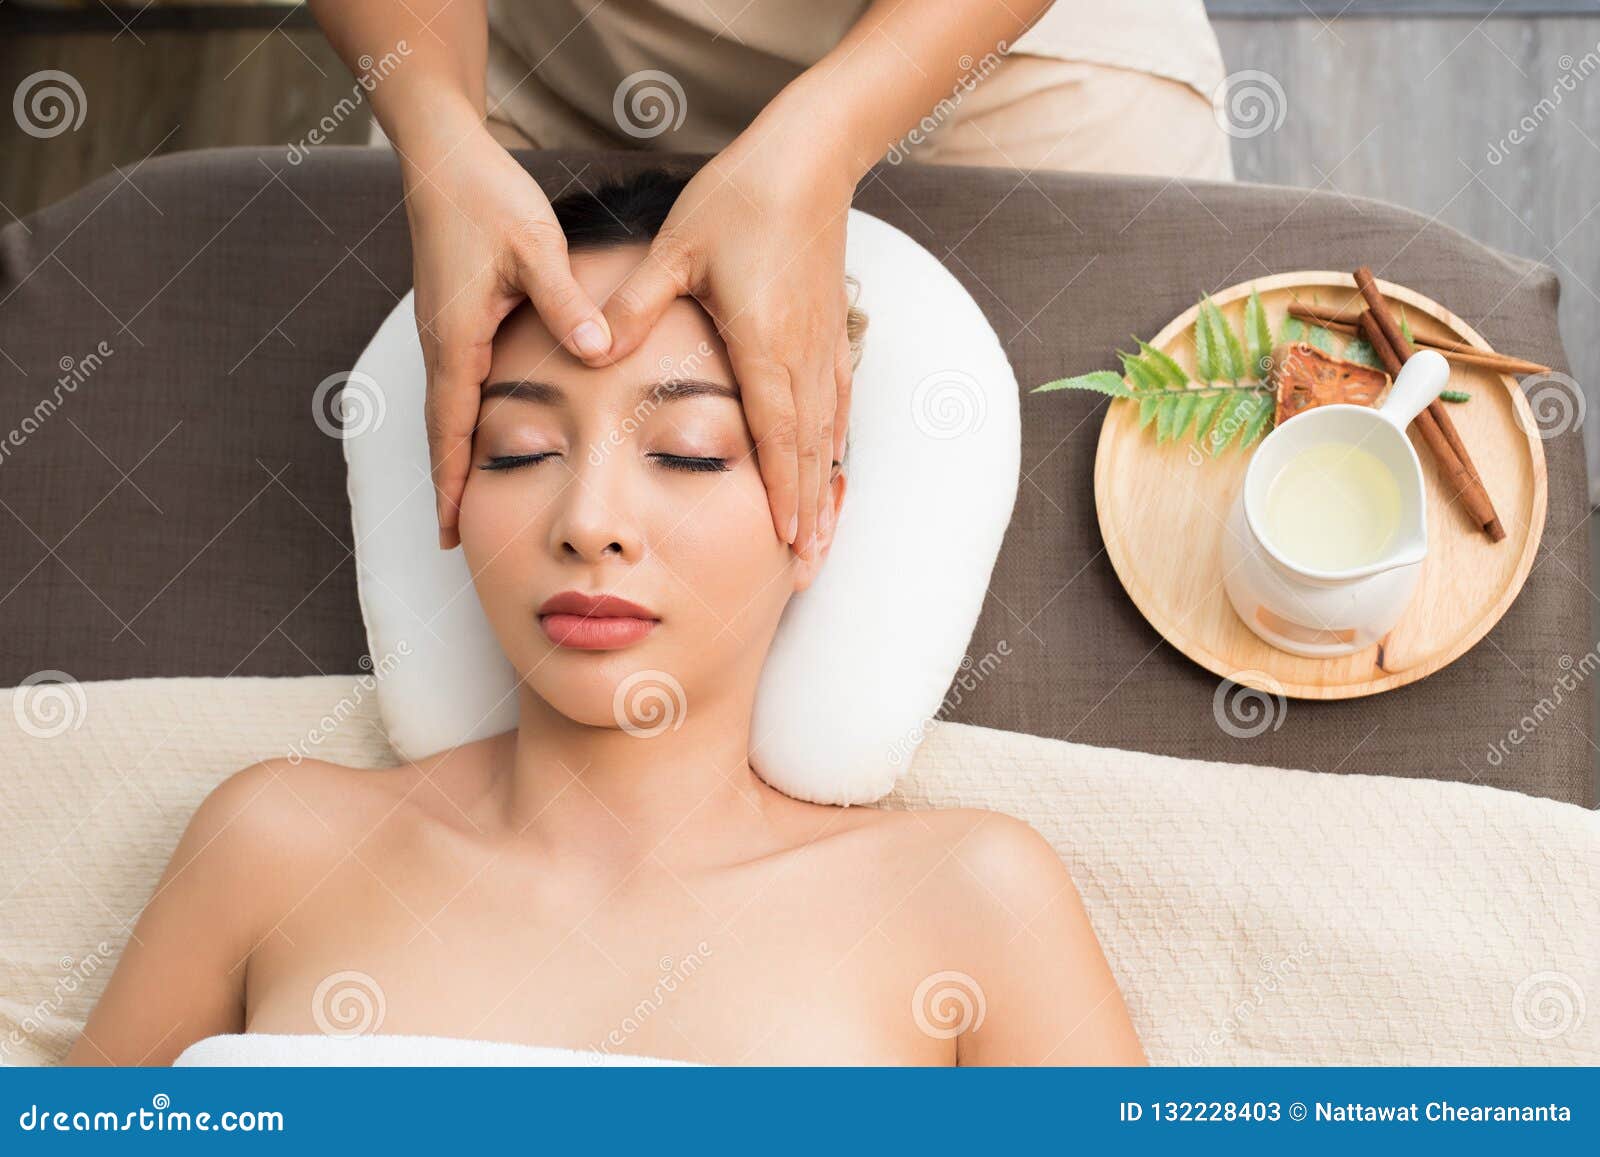 Ayurvedic Head Massage Therapy On Facial Forehead Stock Image Image